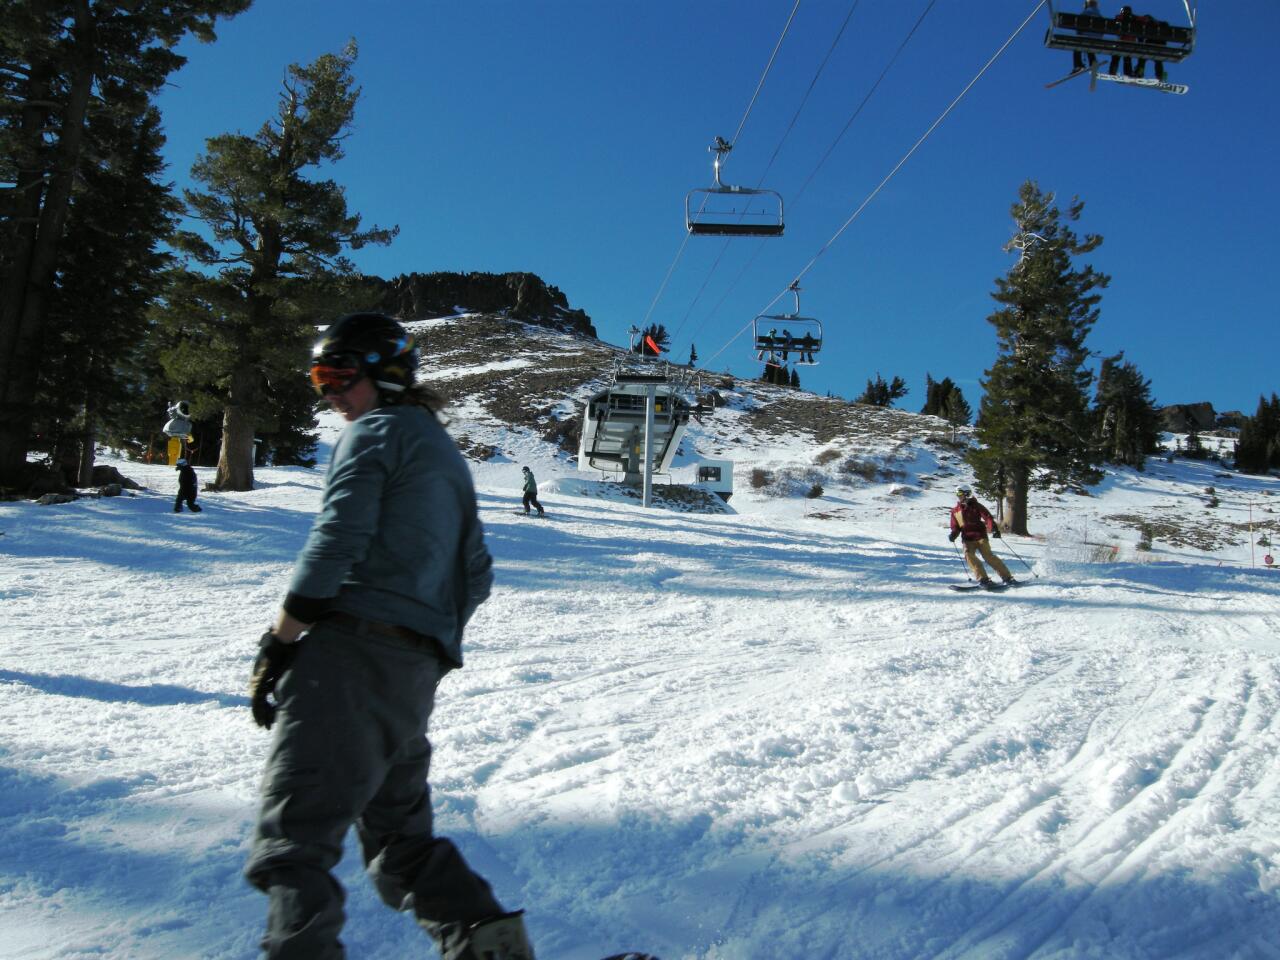 The Squaw Valley ski resort in Olympic Valley, Calif., offers a free half-day lift ticket if you show your boarding pass from your flight that day; the pass is good at the nearby Alpine Meadows resort too. The Reno-Tahoe International Airport is a short drive away.